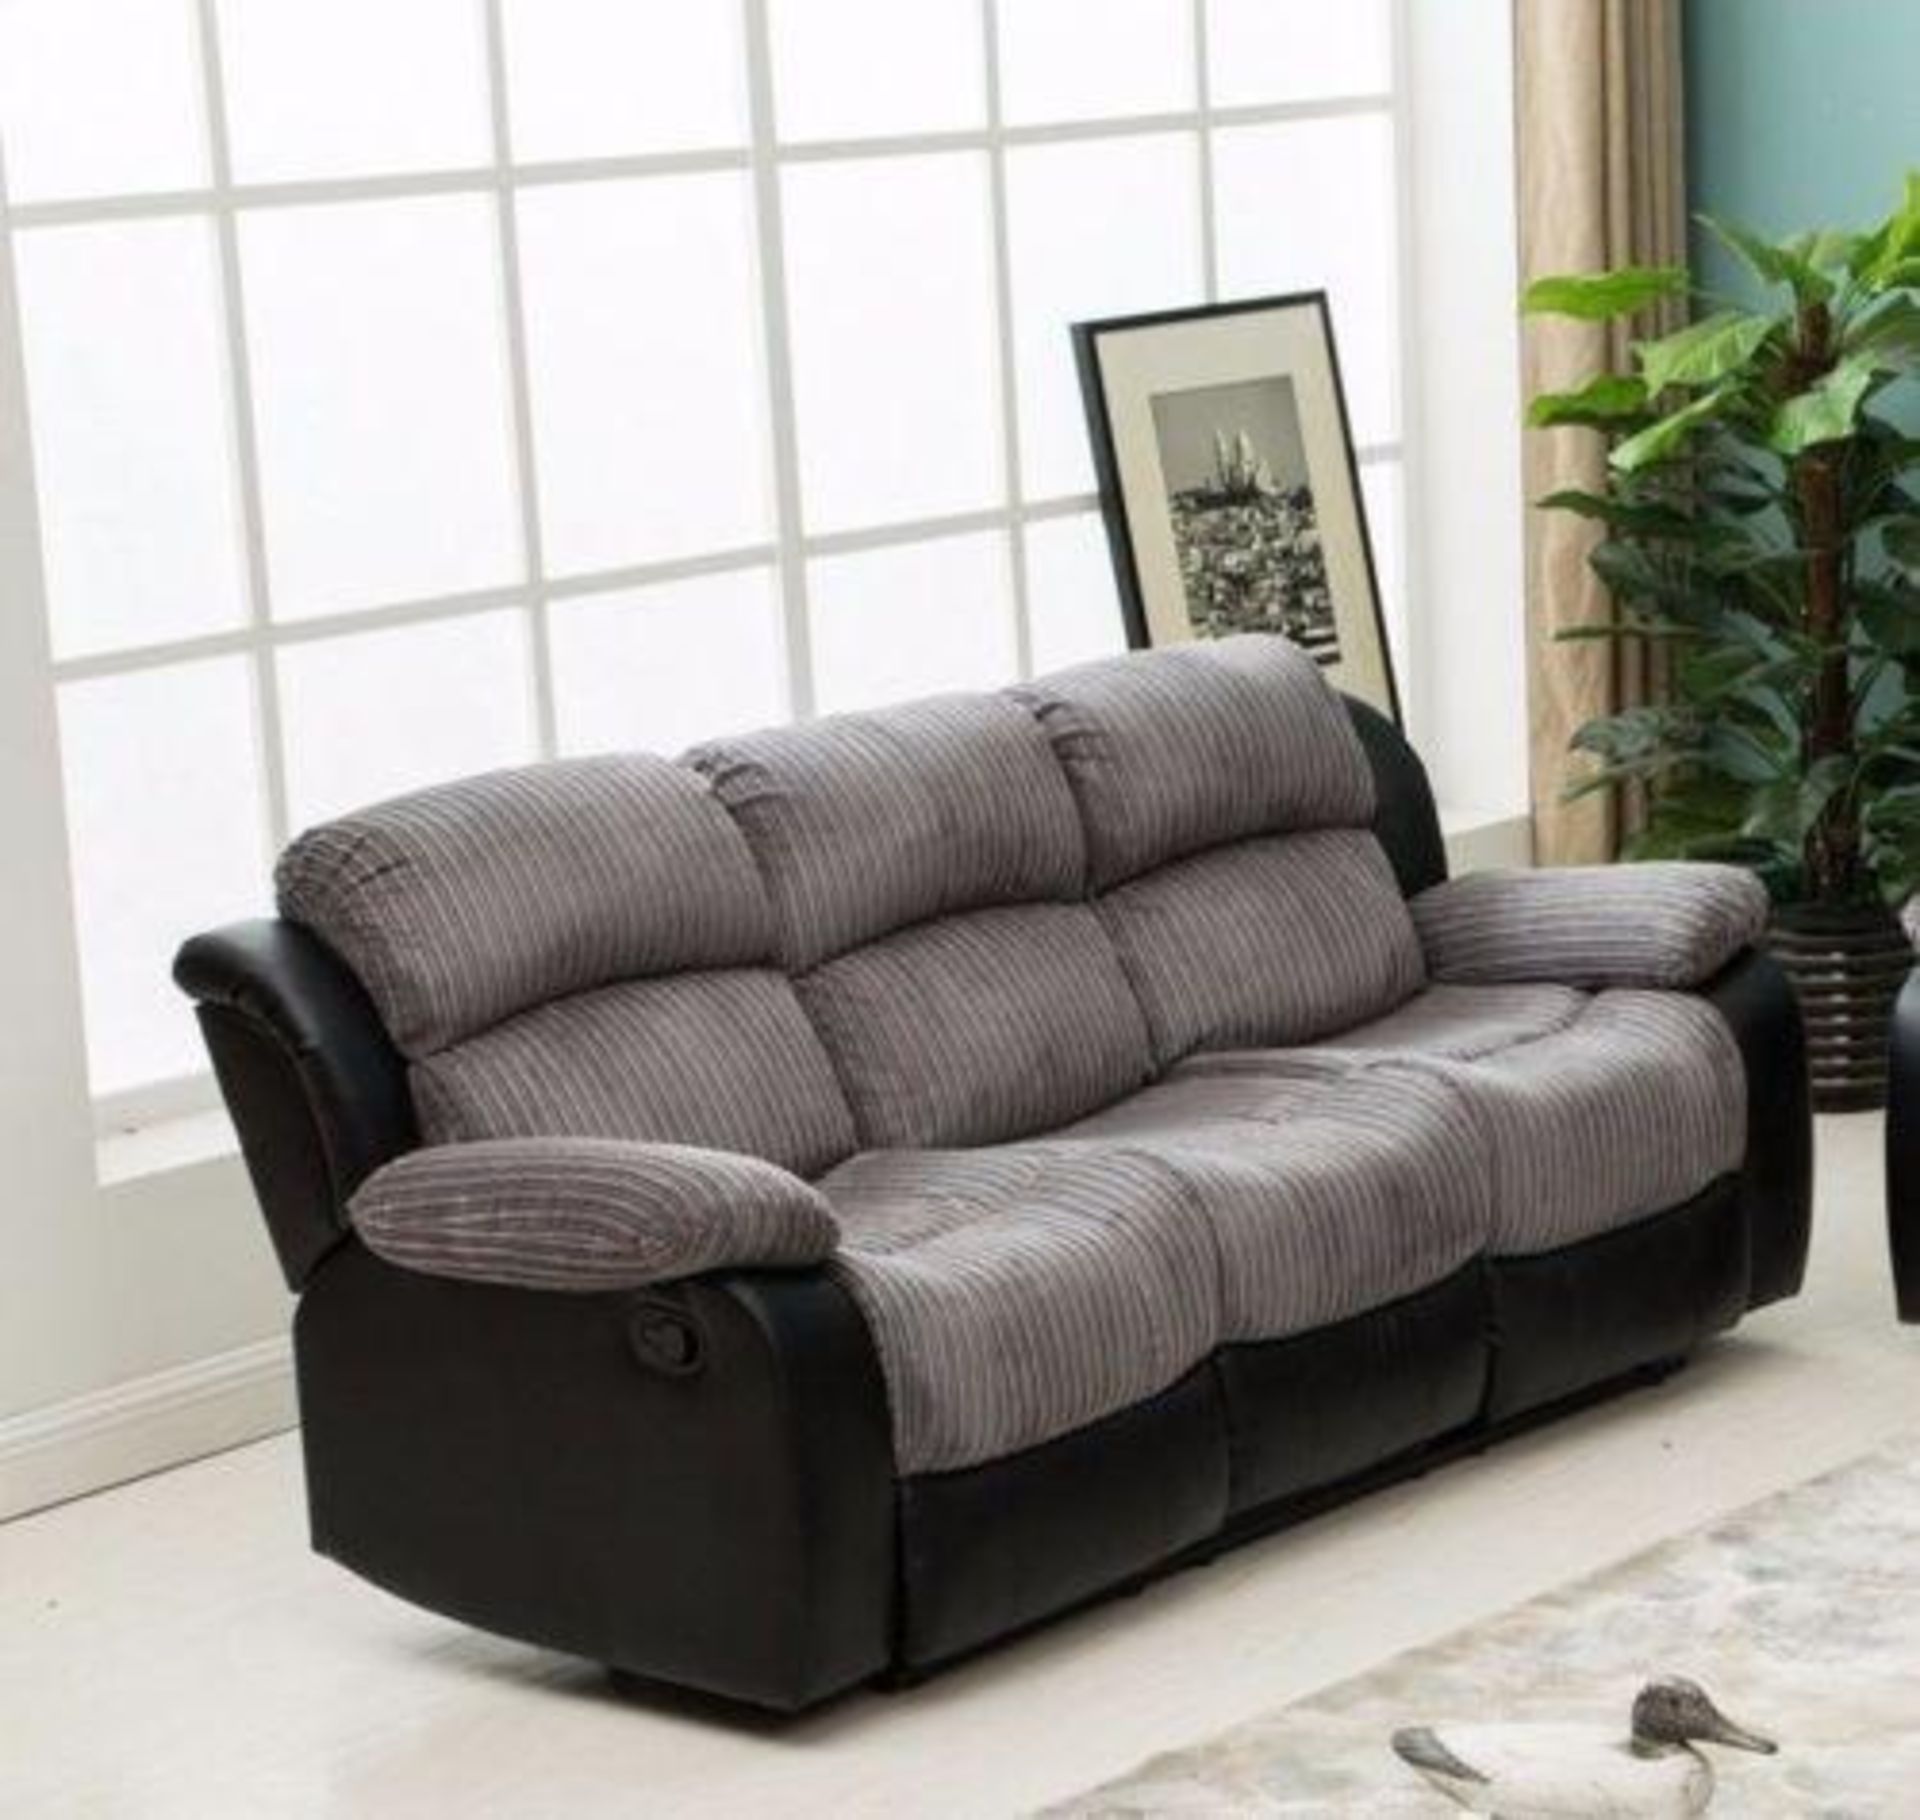 Brand New Boxed 3 Seater Plus 2 Seater California Sofas In Black/Grey - Image 2 of 3